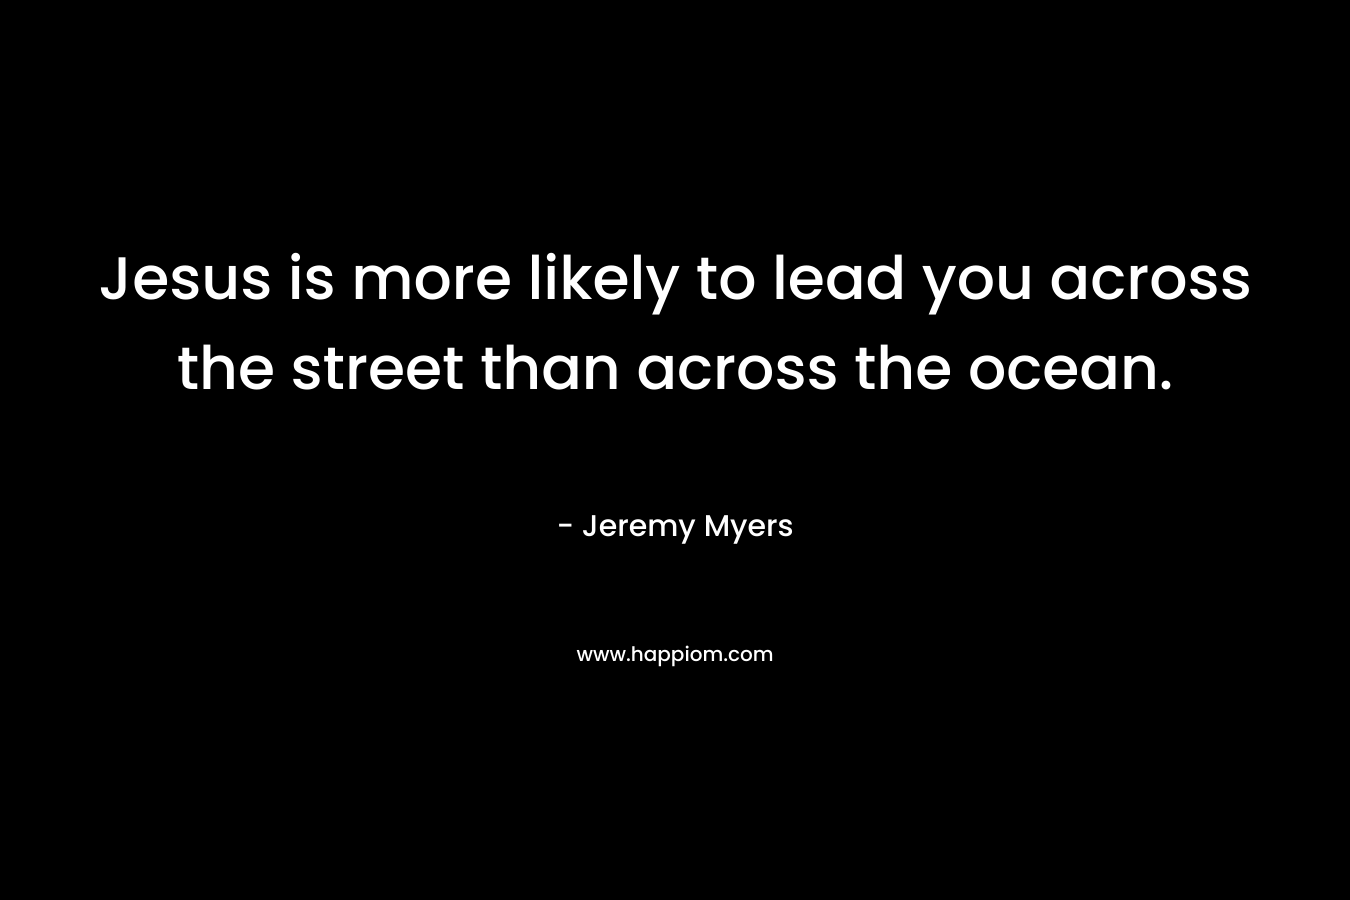 Jesus is more likely to lead you across the street than across the ocean.